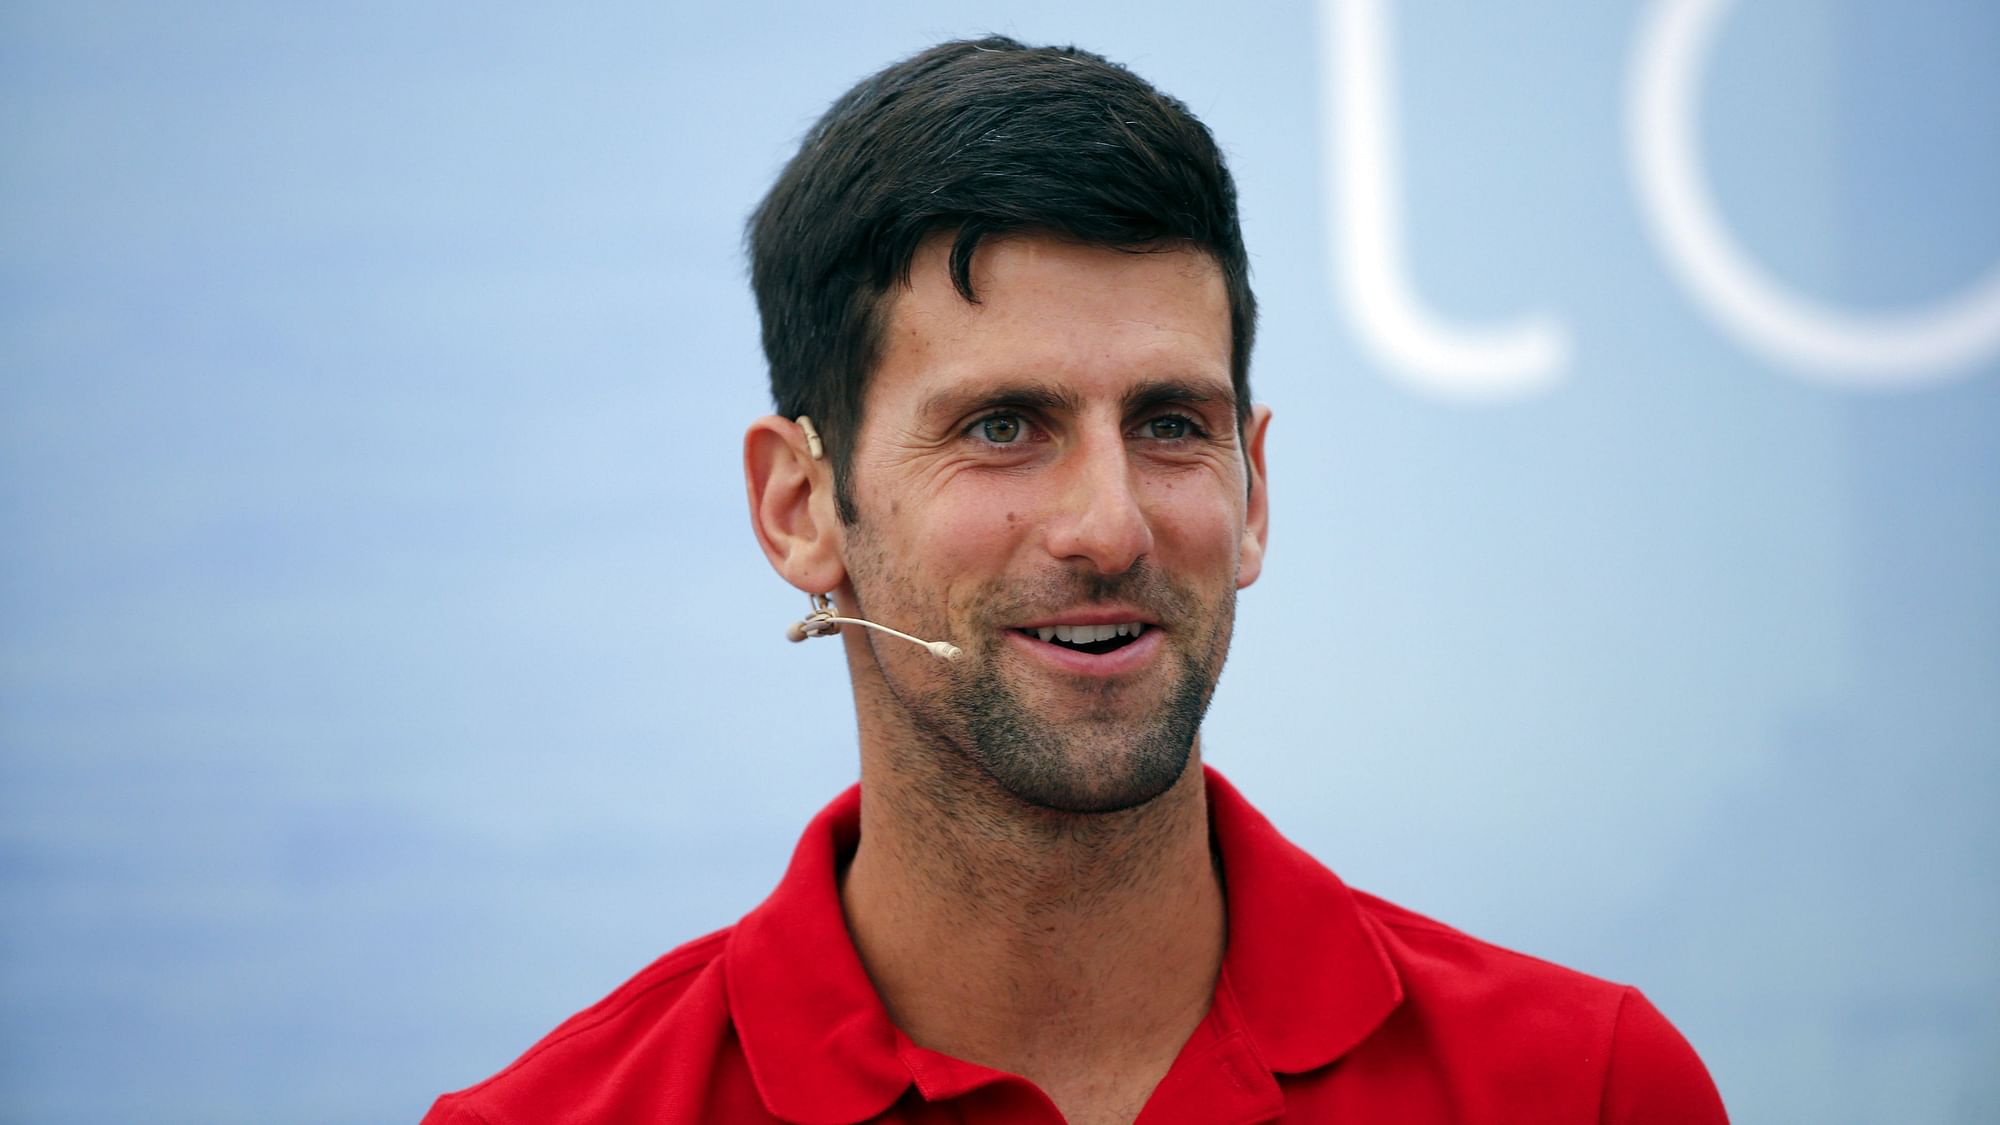 “I am so deeply sorry our tournament has caused harm,” Novak Djokovic said in a new statement after participants of his Adria Tour tested positive for coronavirus.